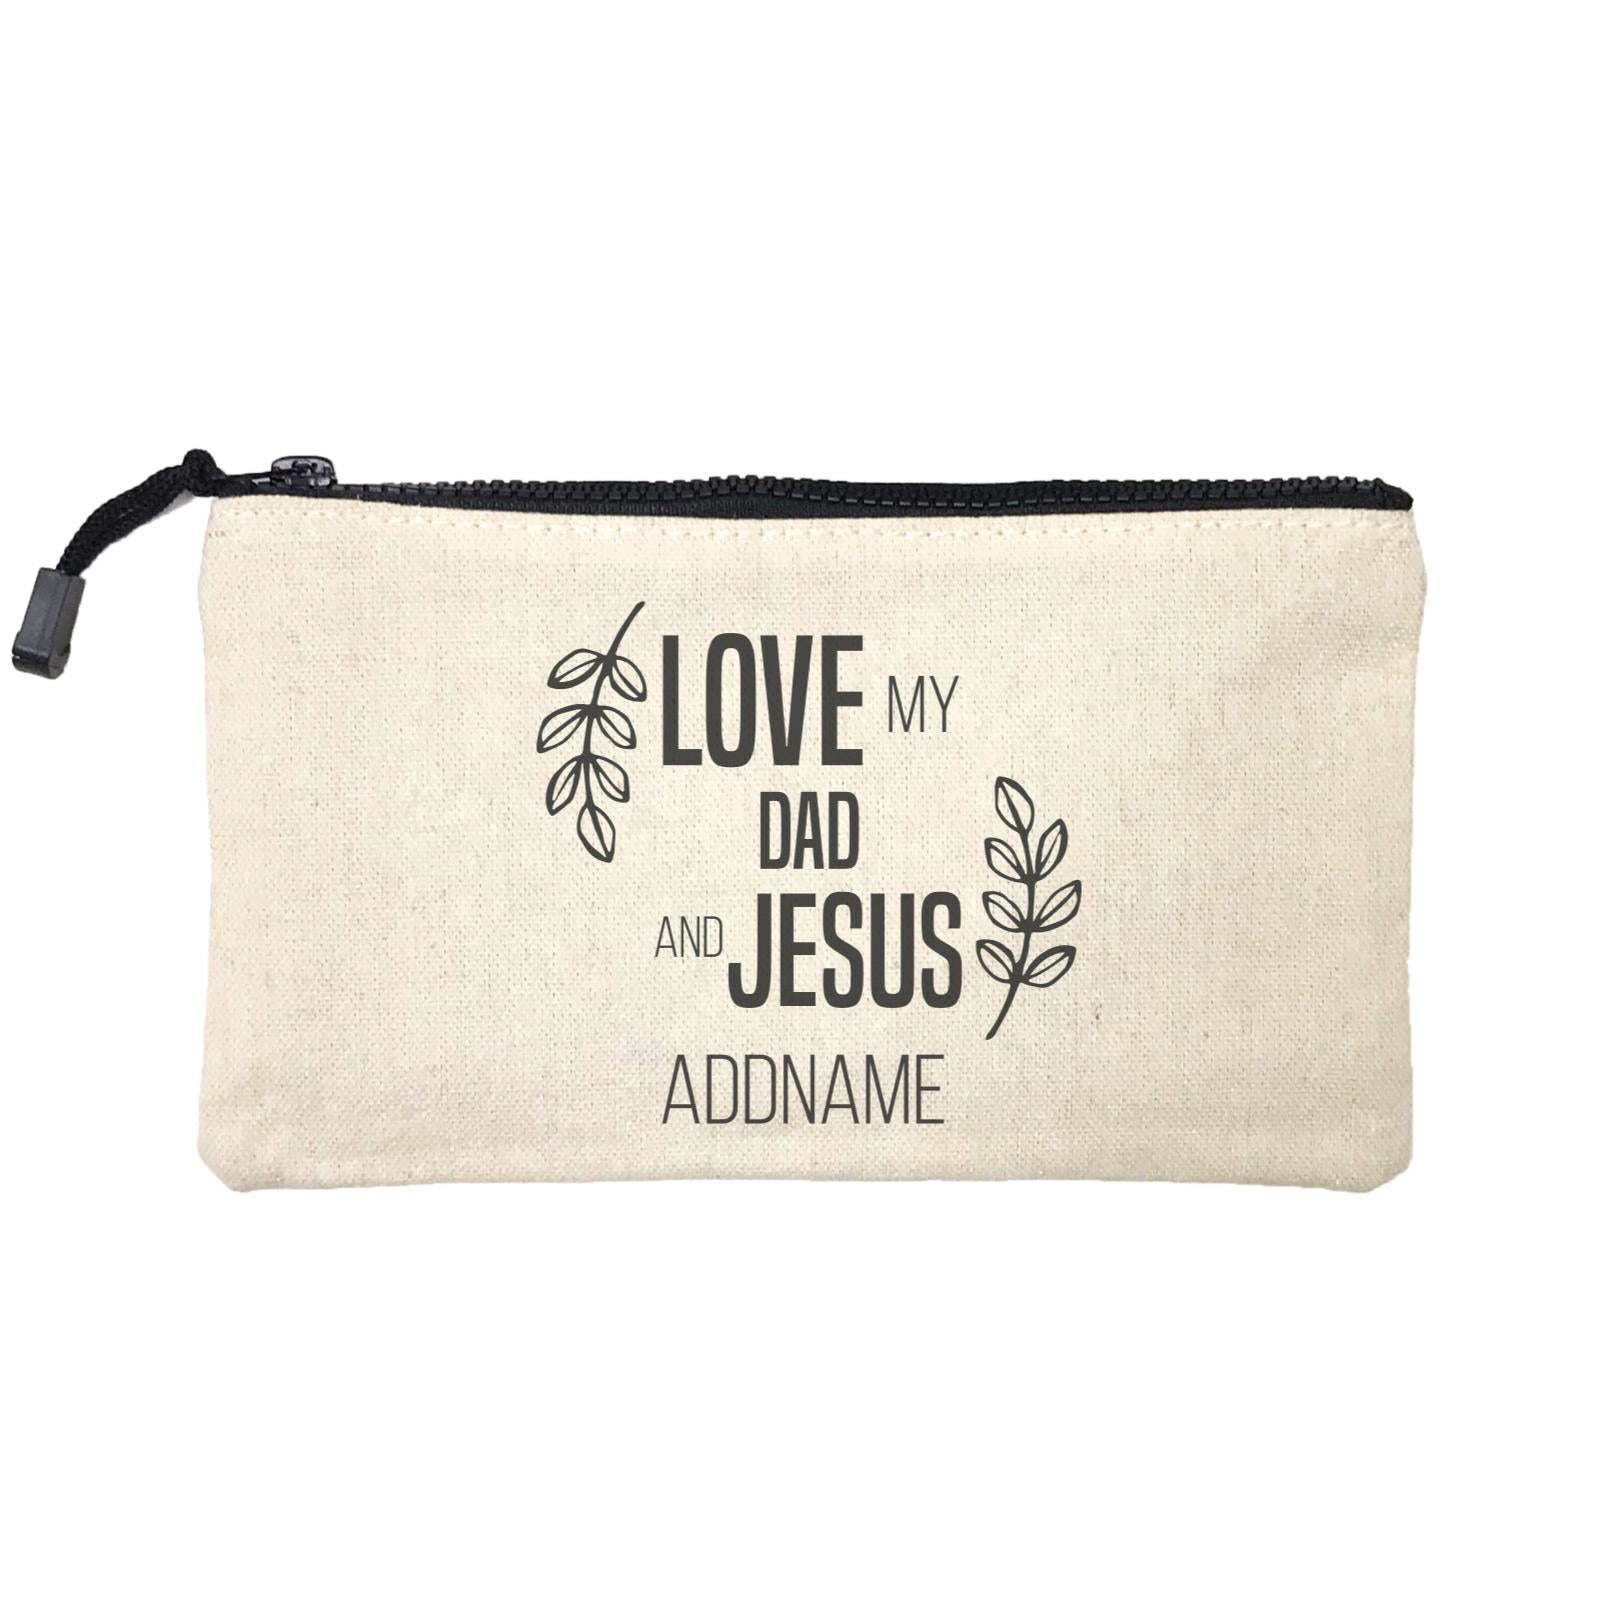 Christian Series Love My Dad And Jesus Addname Mini Accessories Stationery Pouch